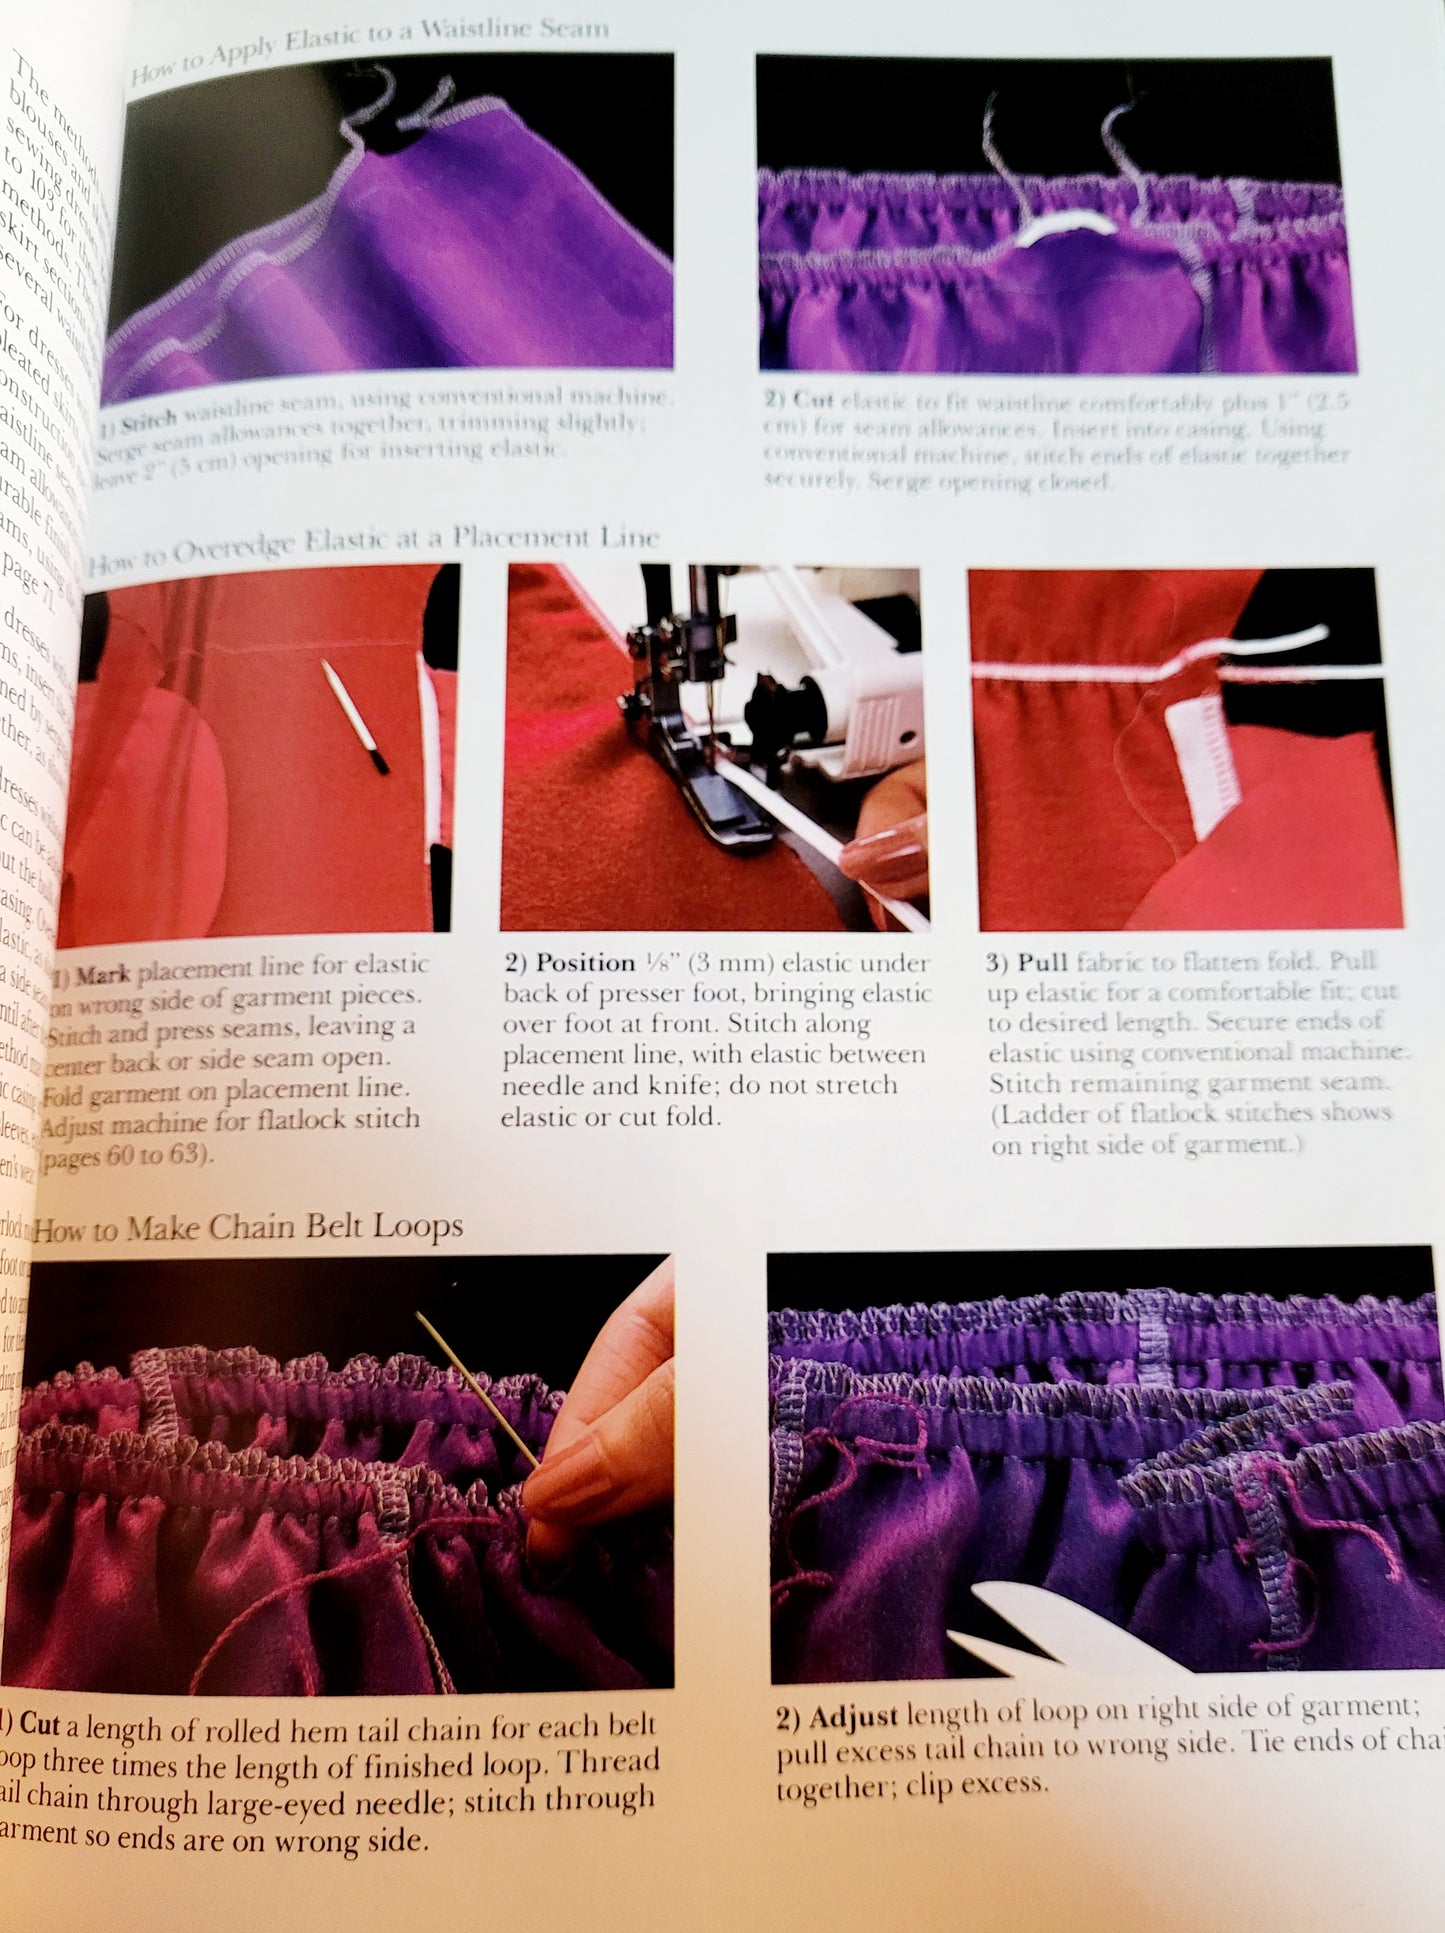 "Sewing with an Overlock" (A Singer Sewing Reference Library) 350+ Colored Pages